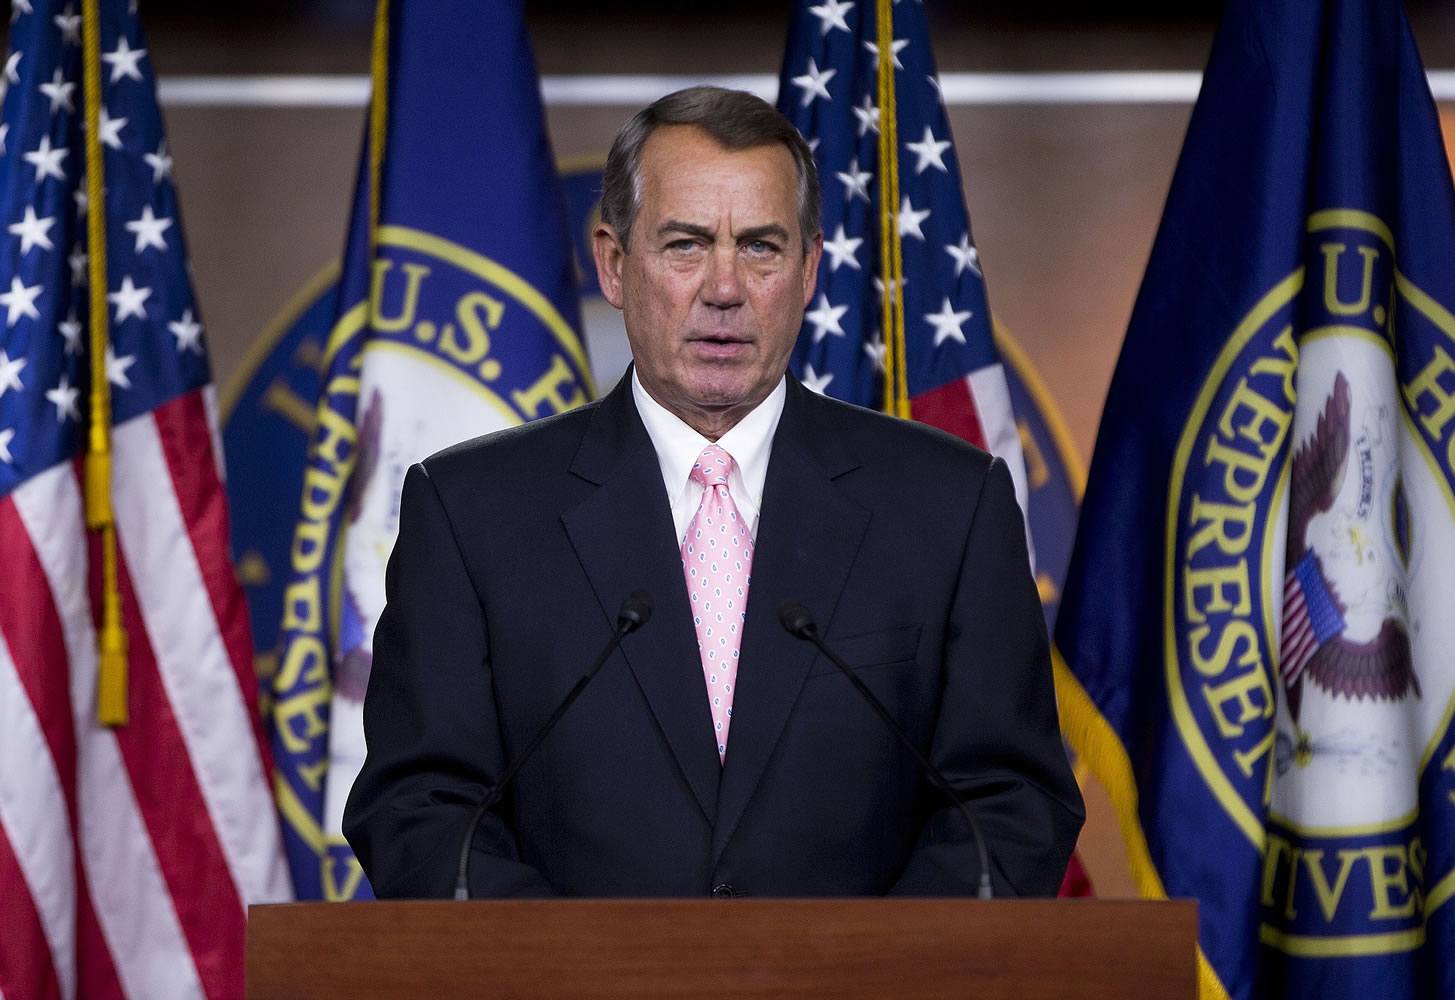 House Speaker John Boehner of Ohio speaks during a news conference on Capitol Hill in Washington.